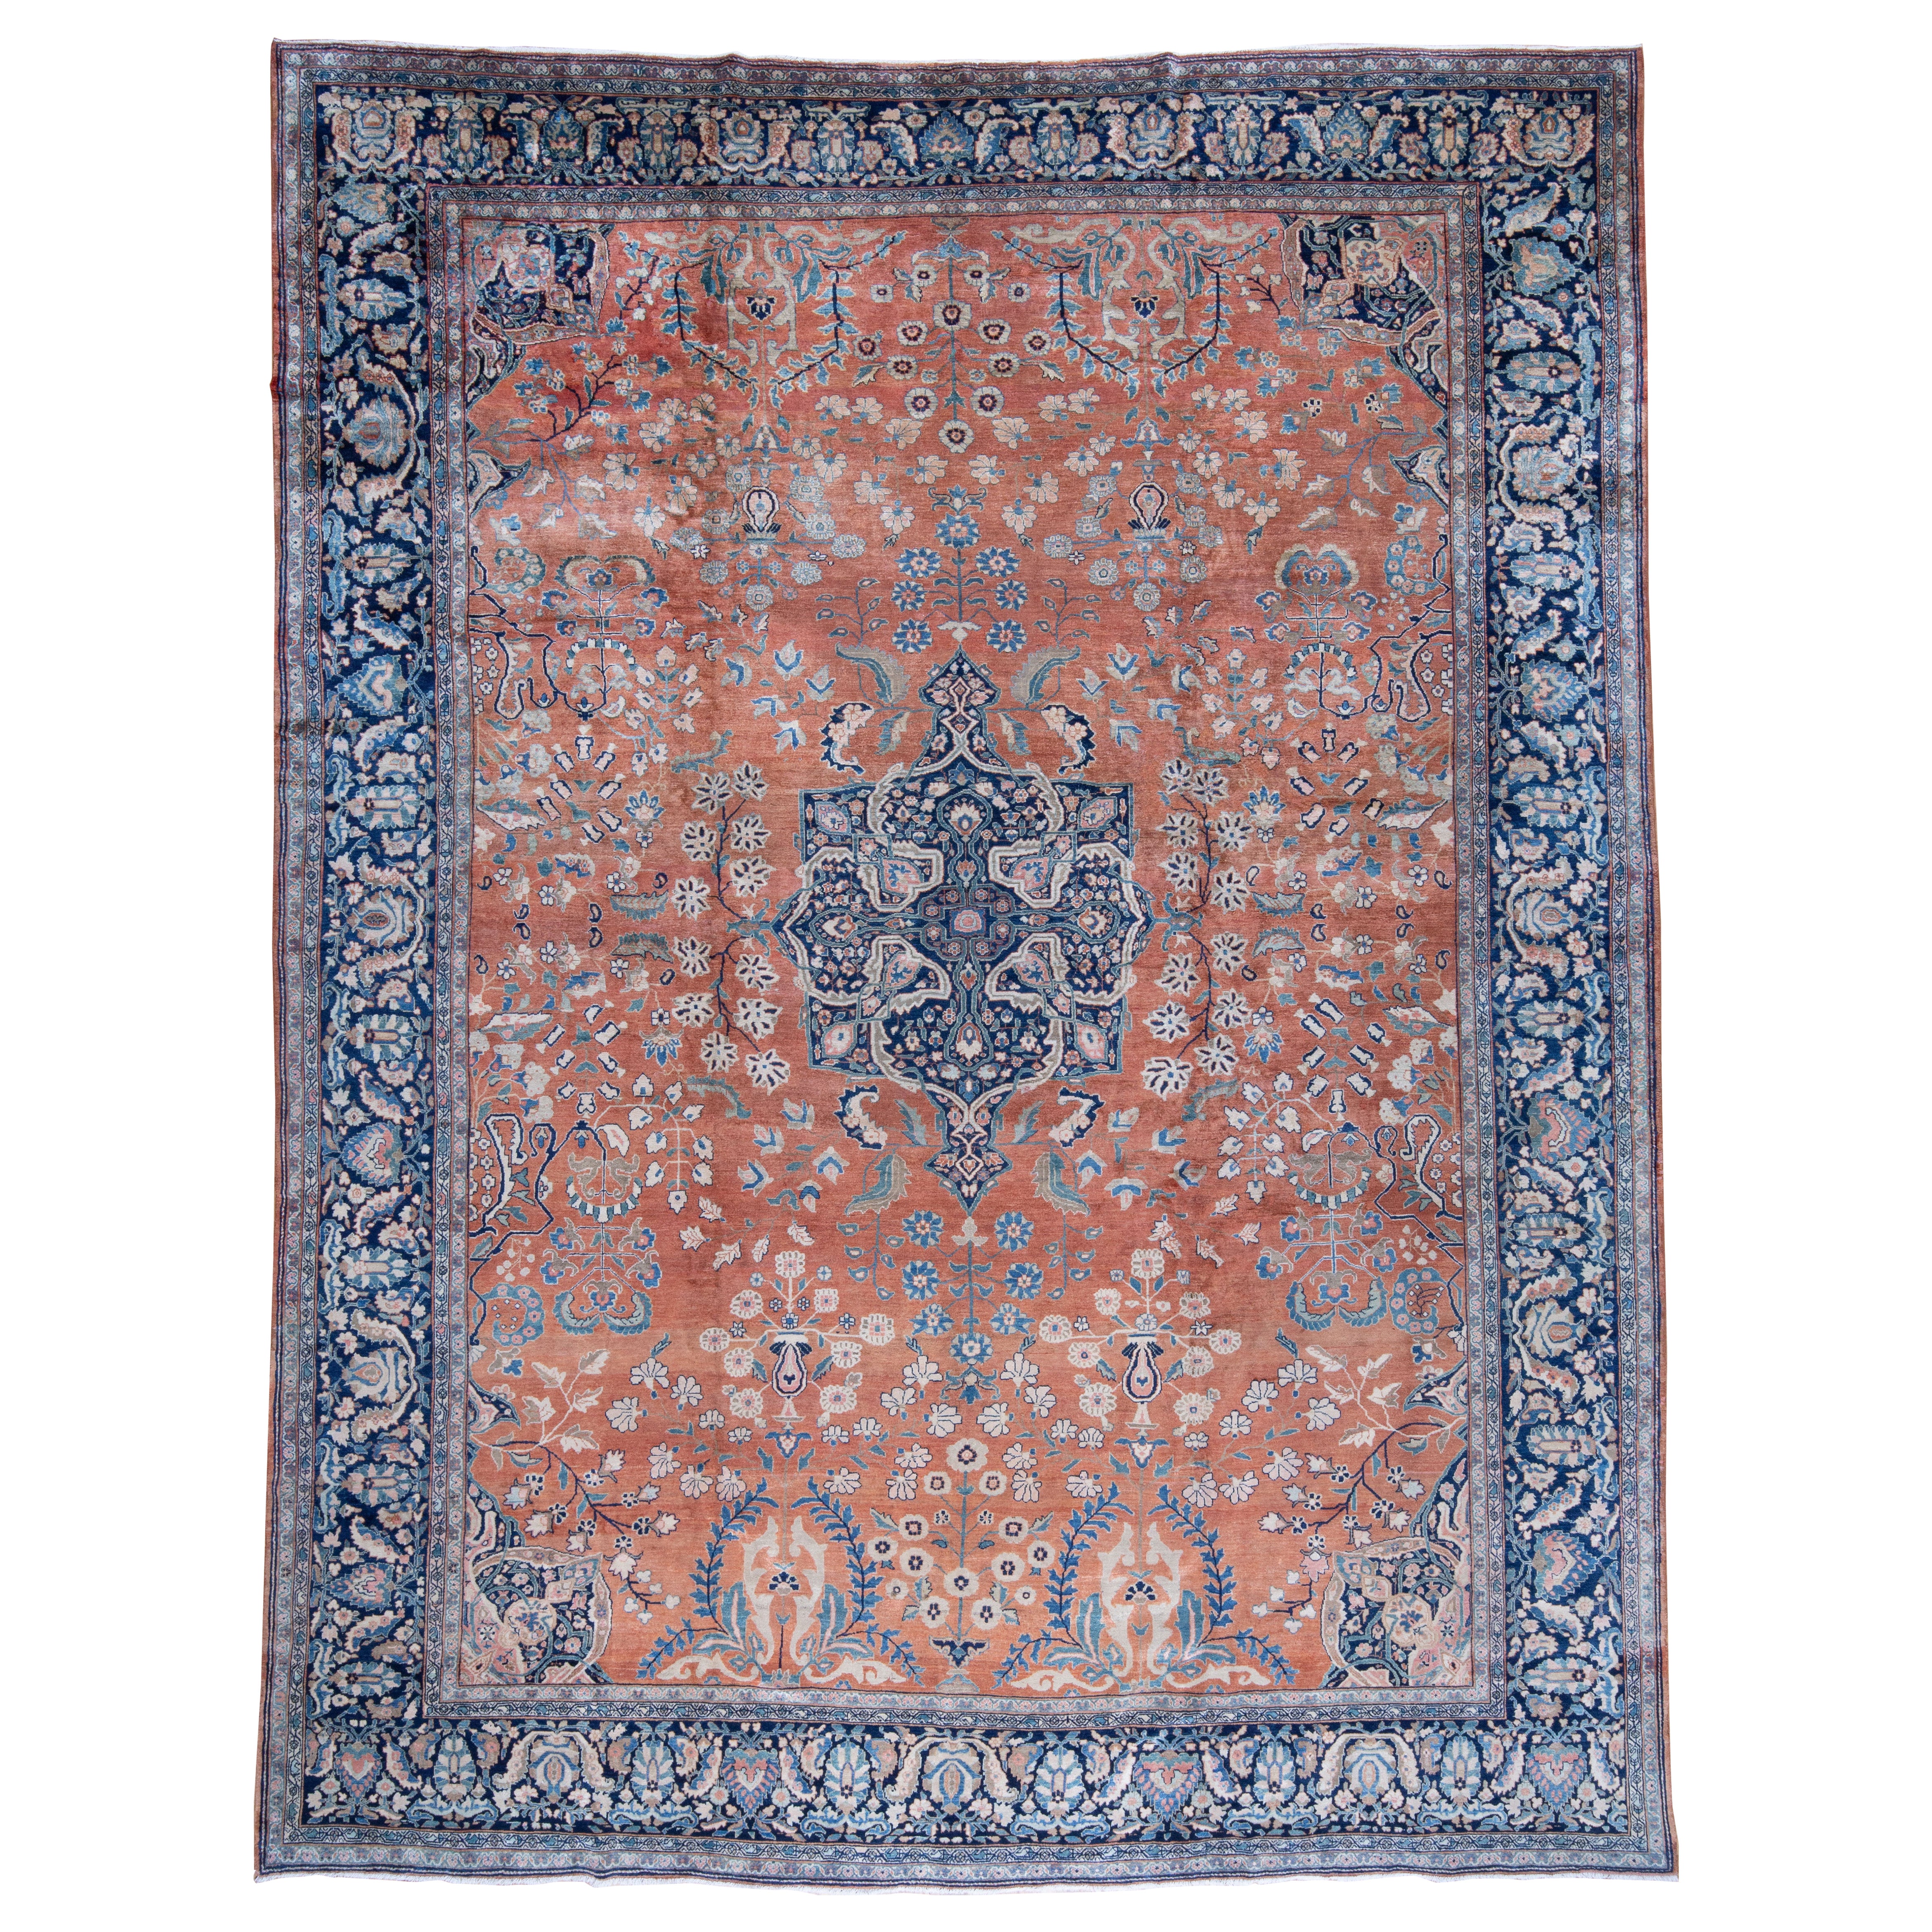 Oversized Antique Persian Ferahan Sarouk Coral and Blue Rug, late 19th Century